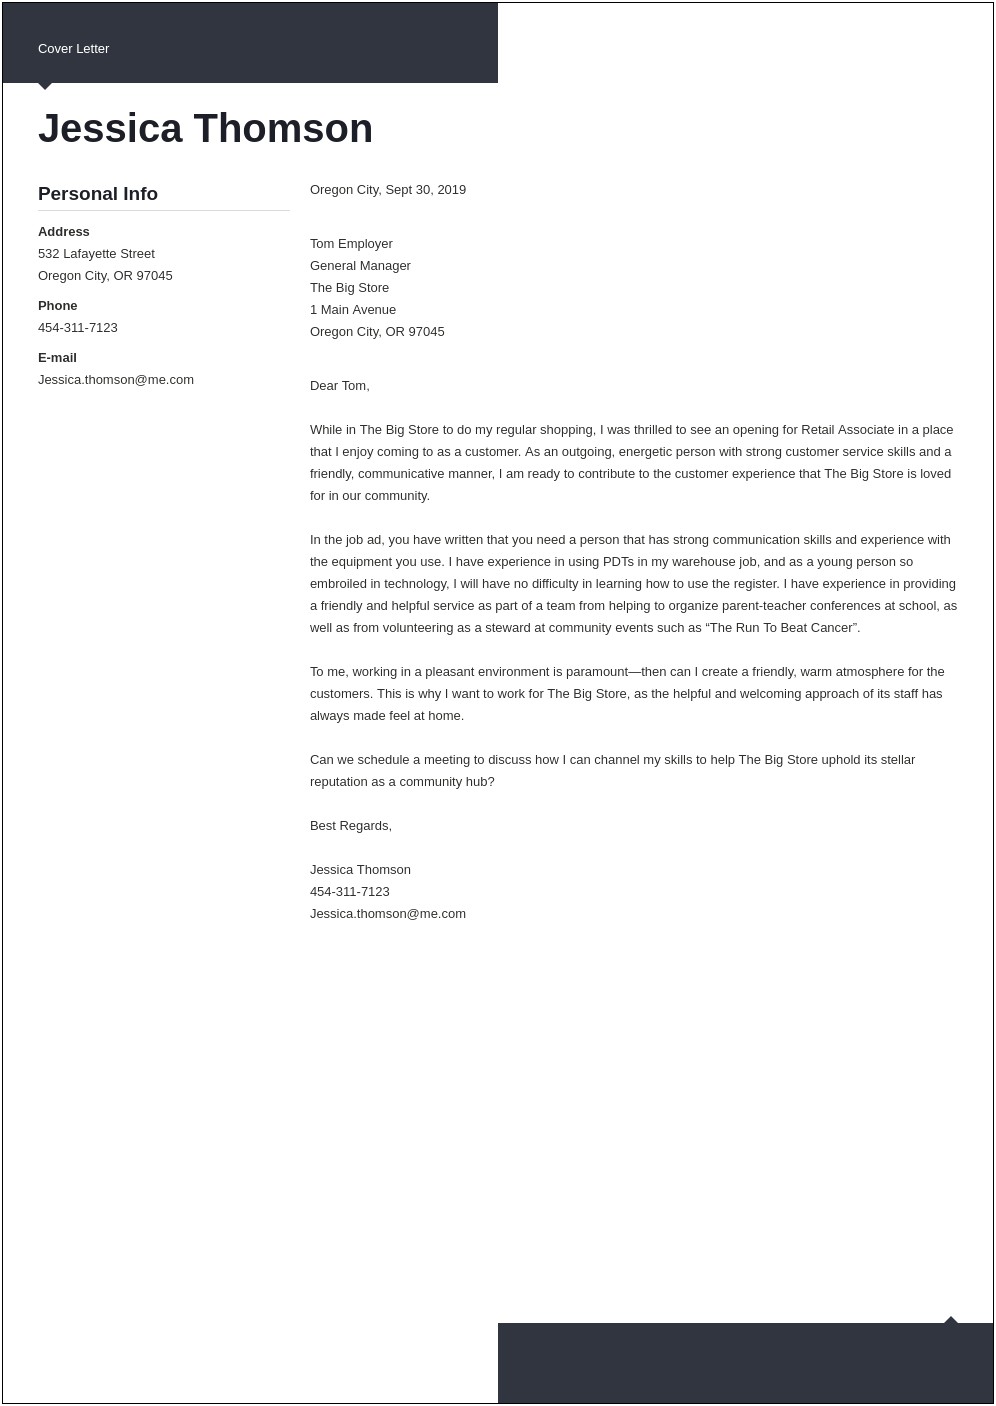 Sample Retail Cover Letters For Resumes